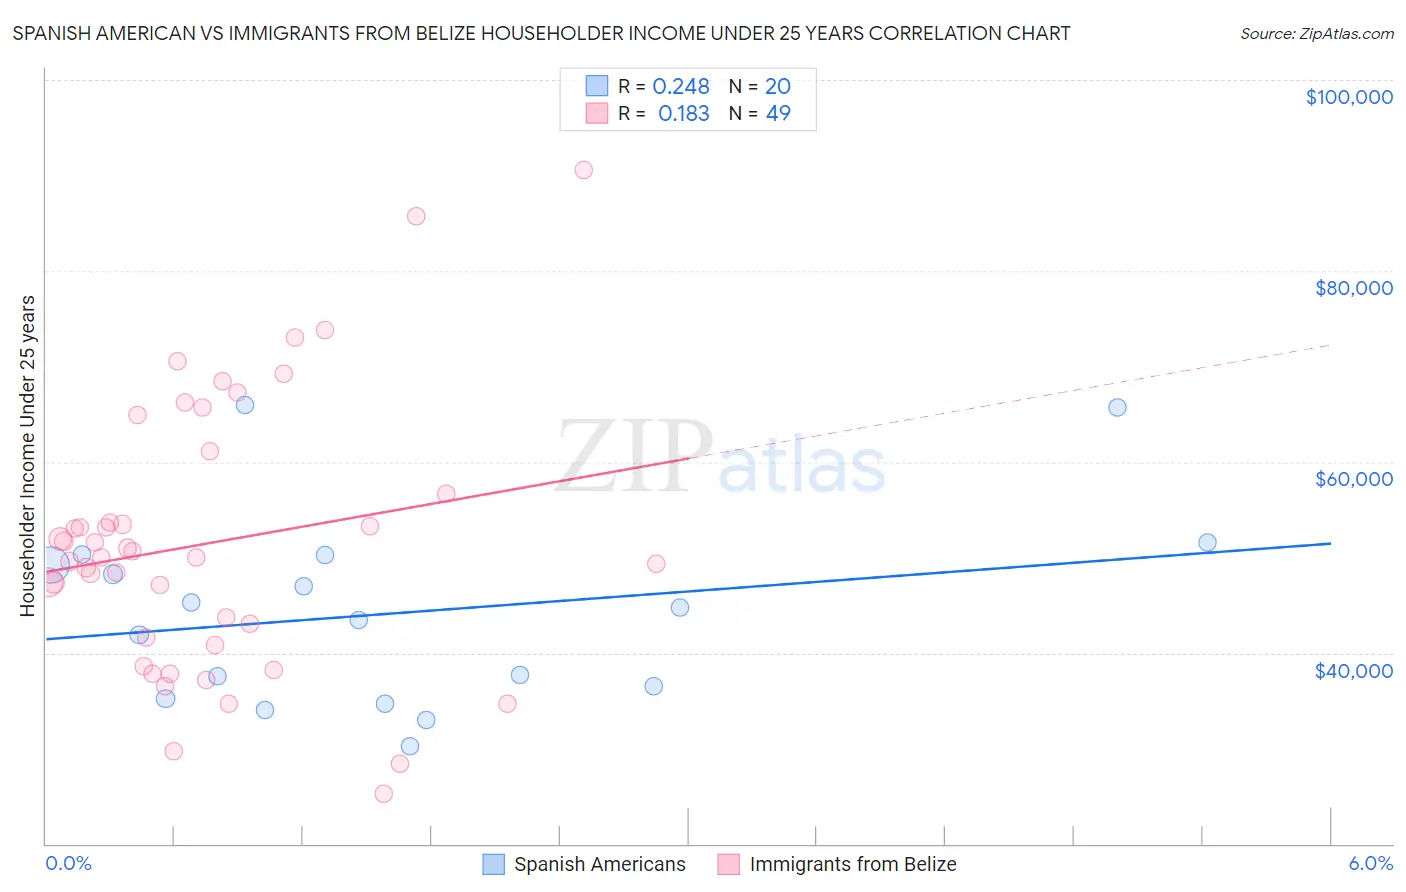 Spanish American vs Immigrants from Belize Householder Income Under 25 years